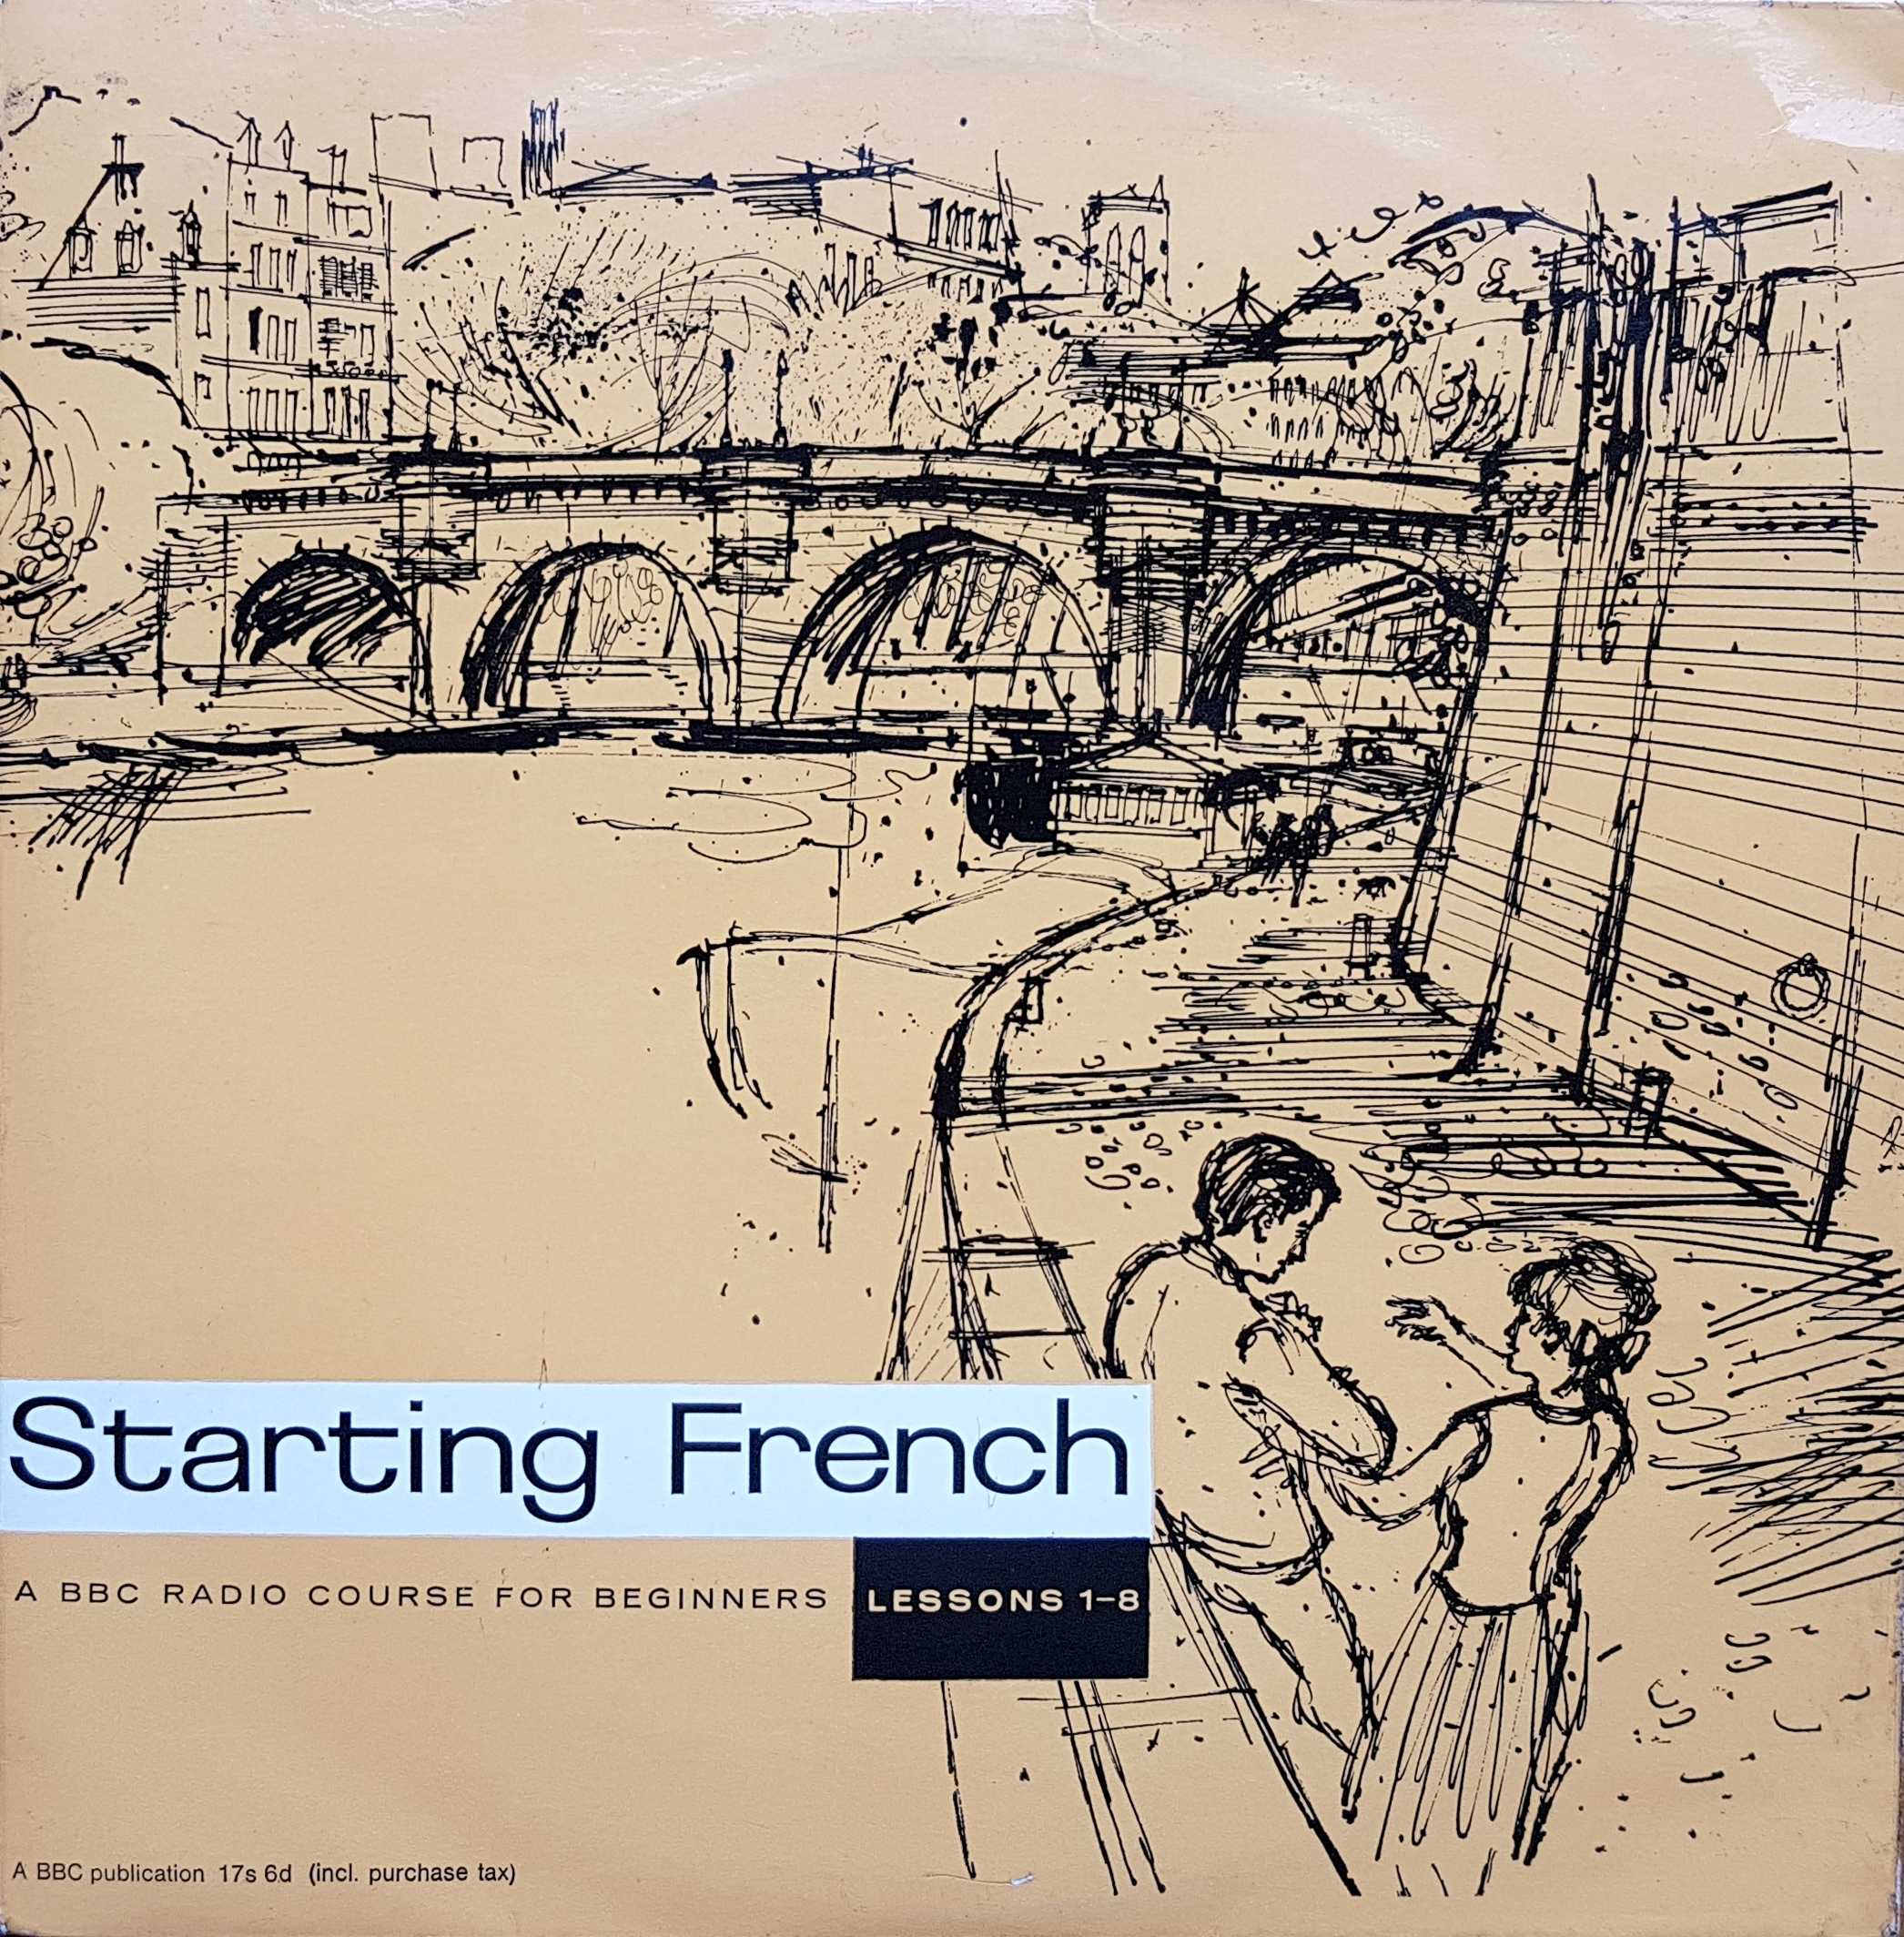 Picture of OP 17/18 Starting French - Parts 1 - 8 by artist Elsie Ferguson from the BBC albums - Records and Tapes library